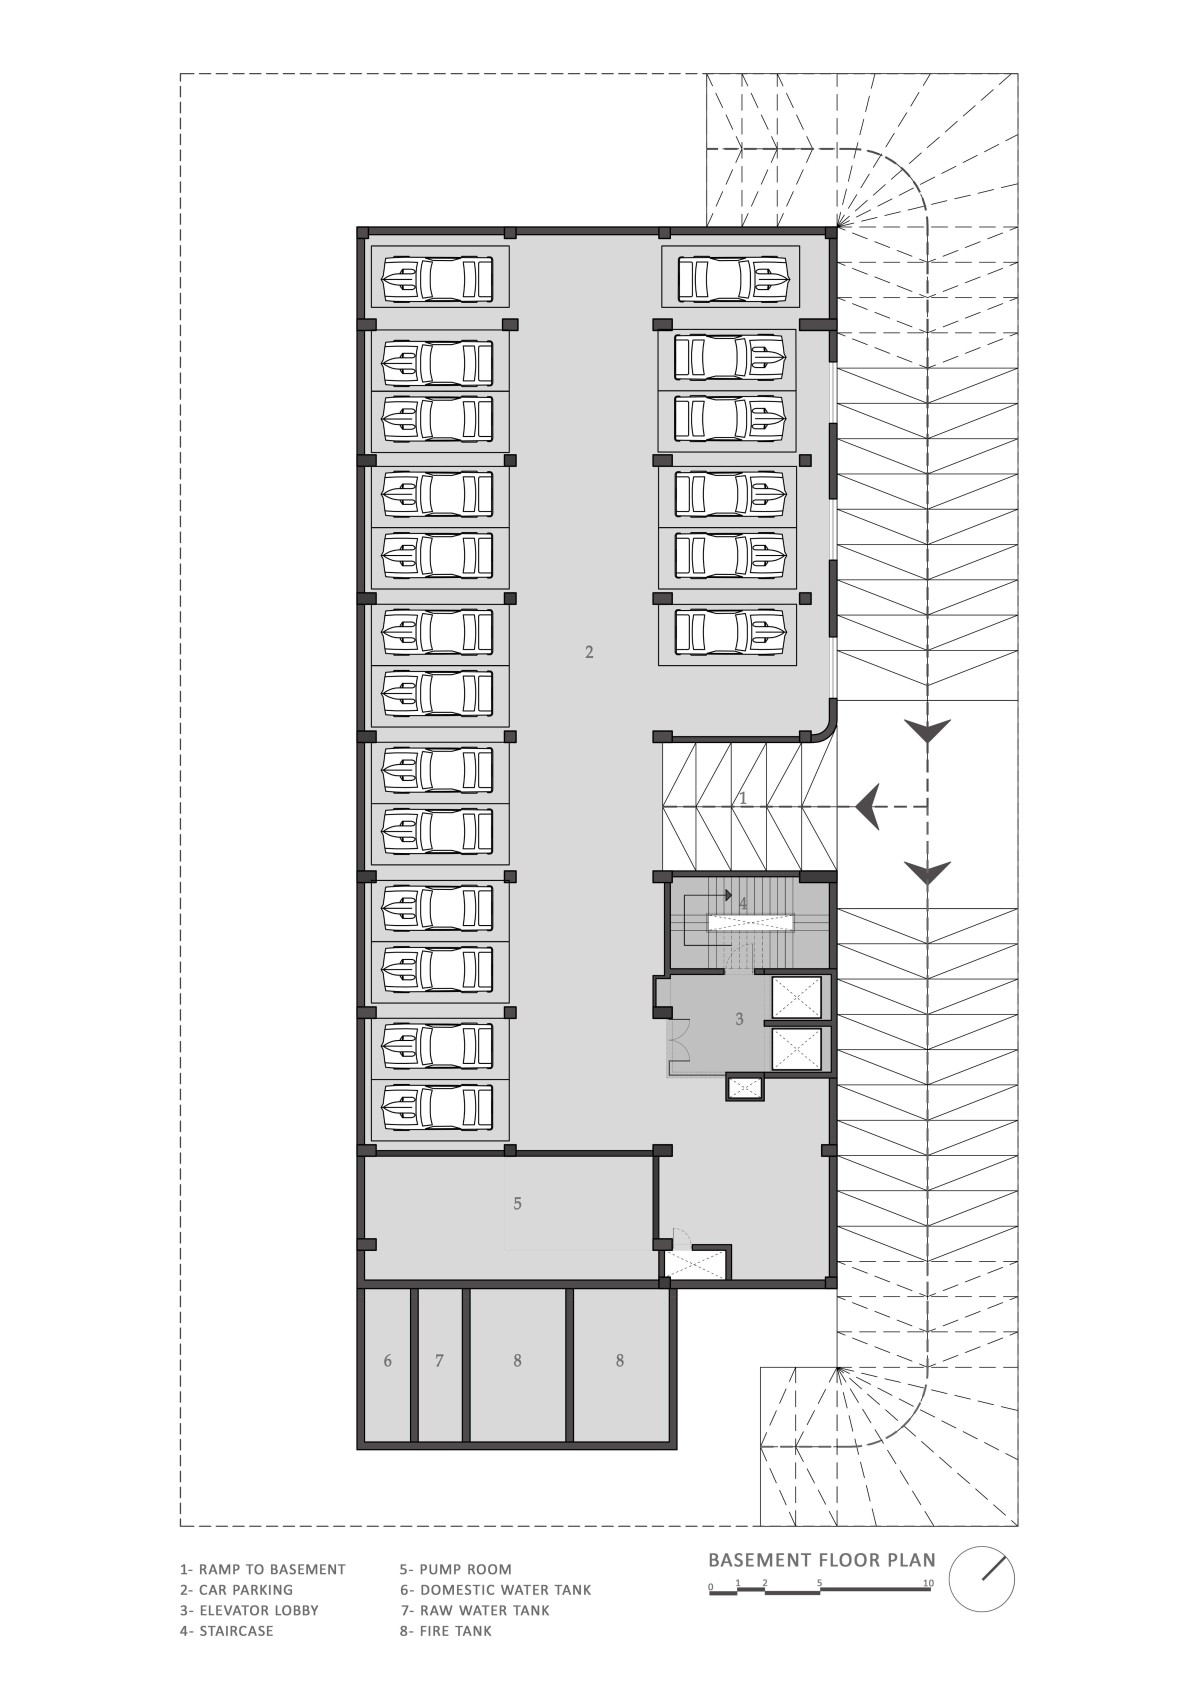 Basement Plan of Outline by Design Three Sixty